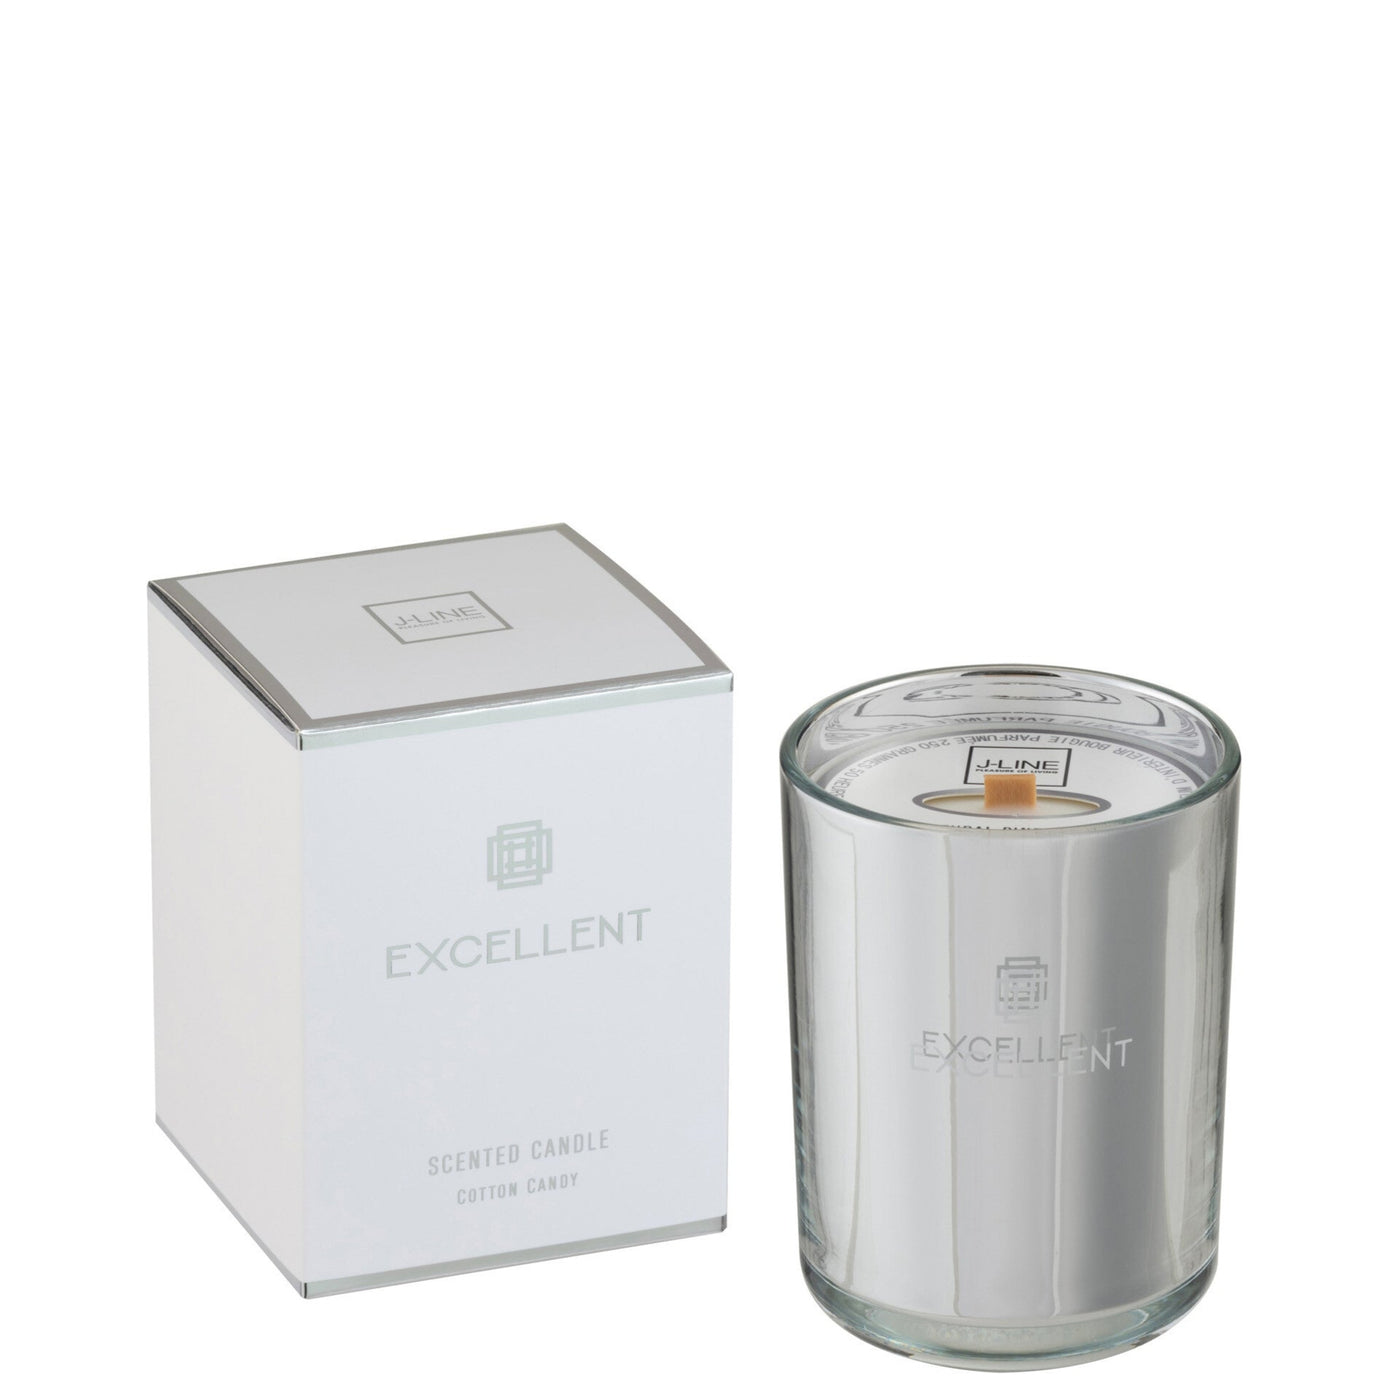 SCENTED CANDLE EXCELLENT COTTON CANDY SILVER SMALL-50HOURS